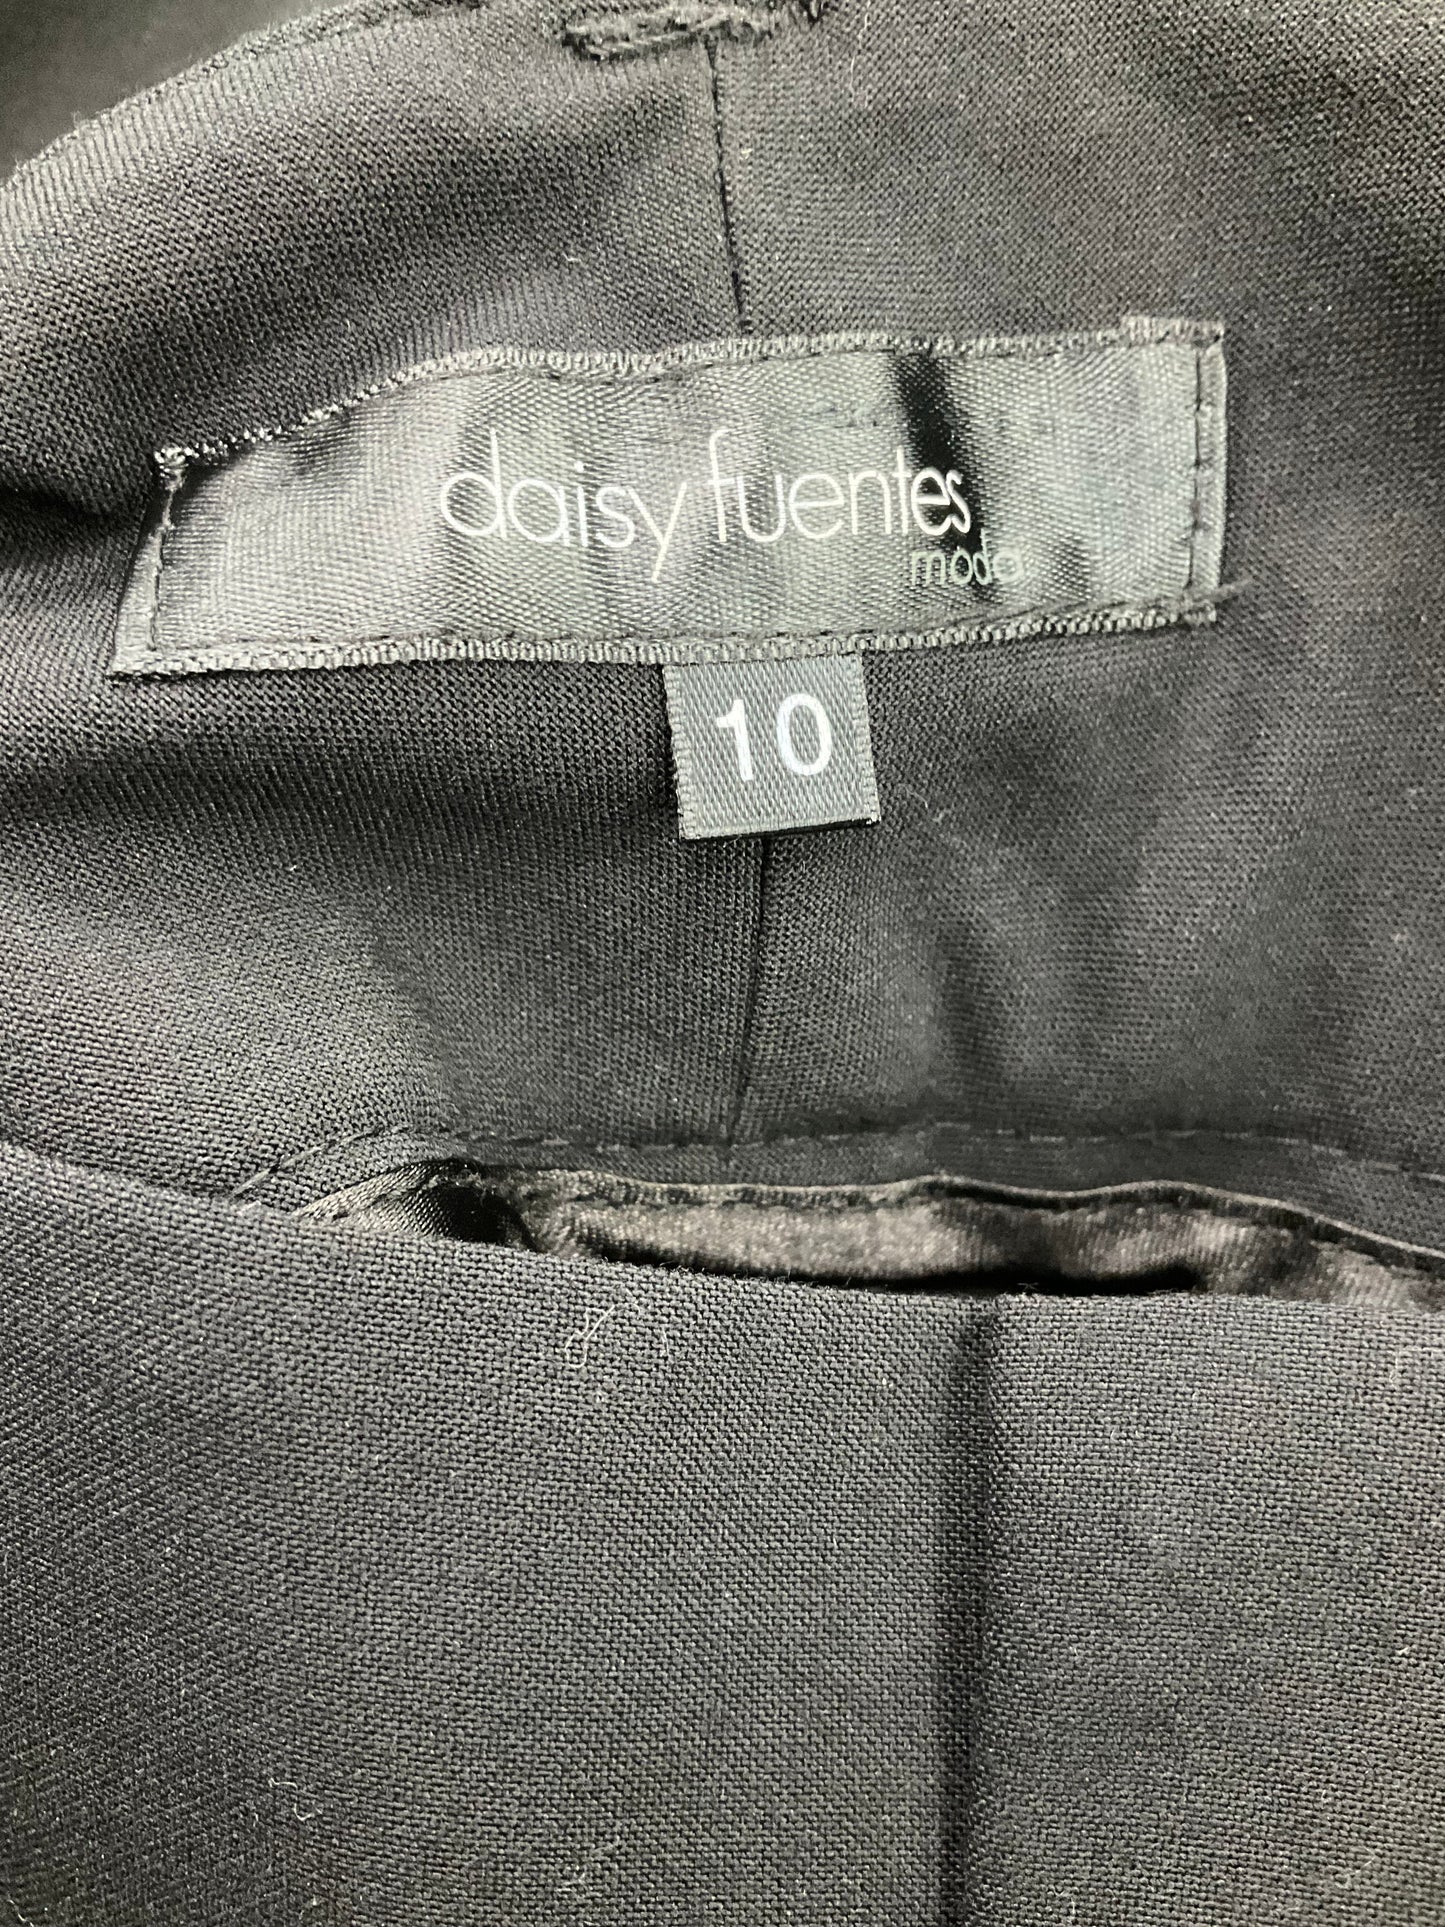 Capris By Daisy Fuentes  Size: 10